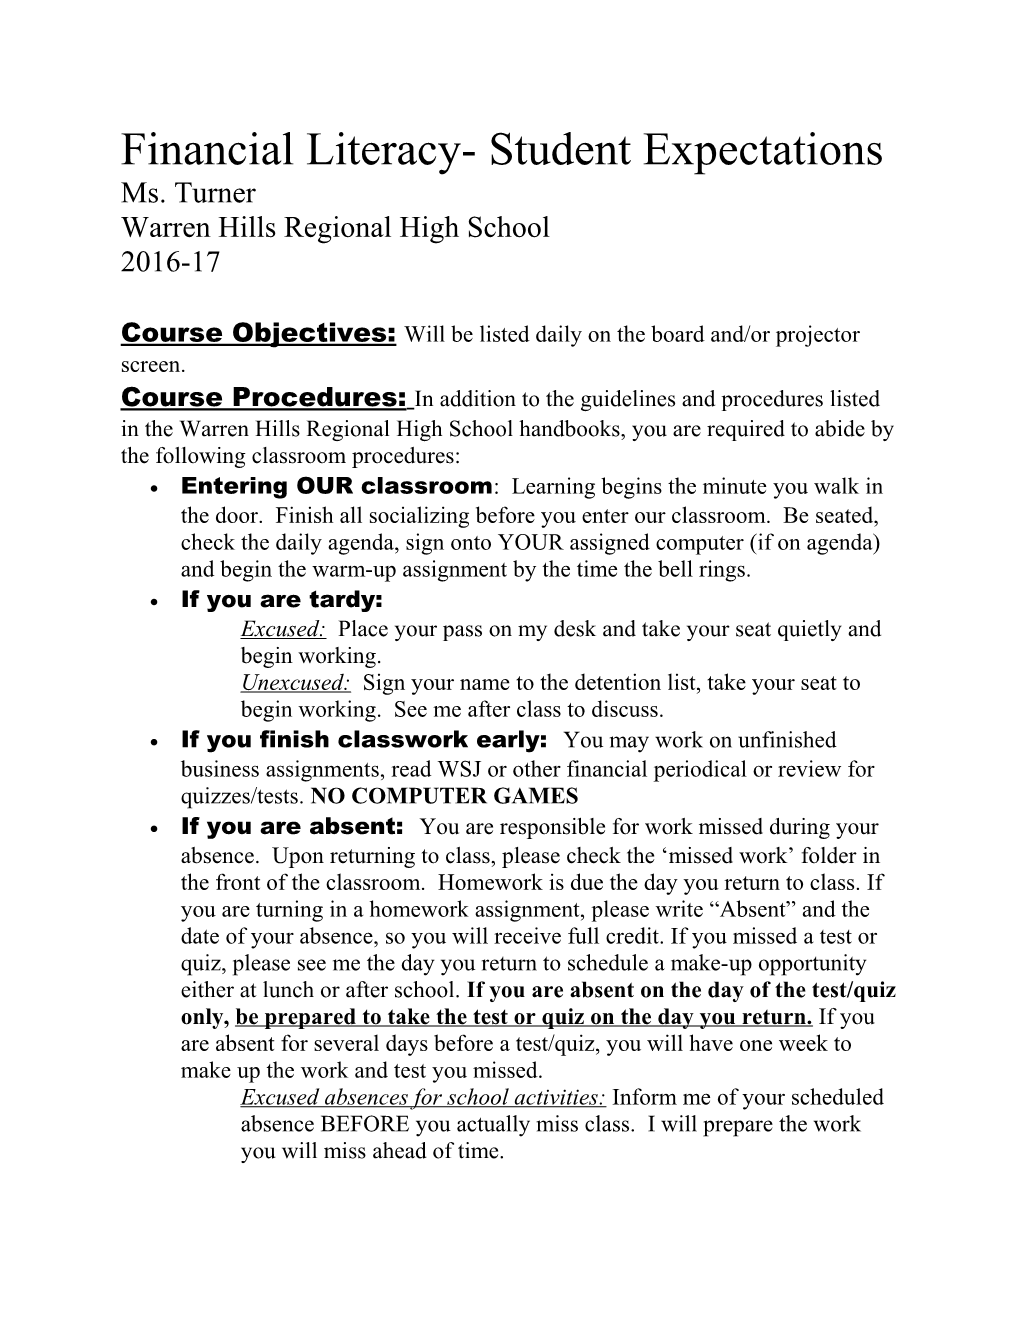 Financial Literacy- Student Expectations